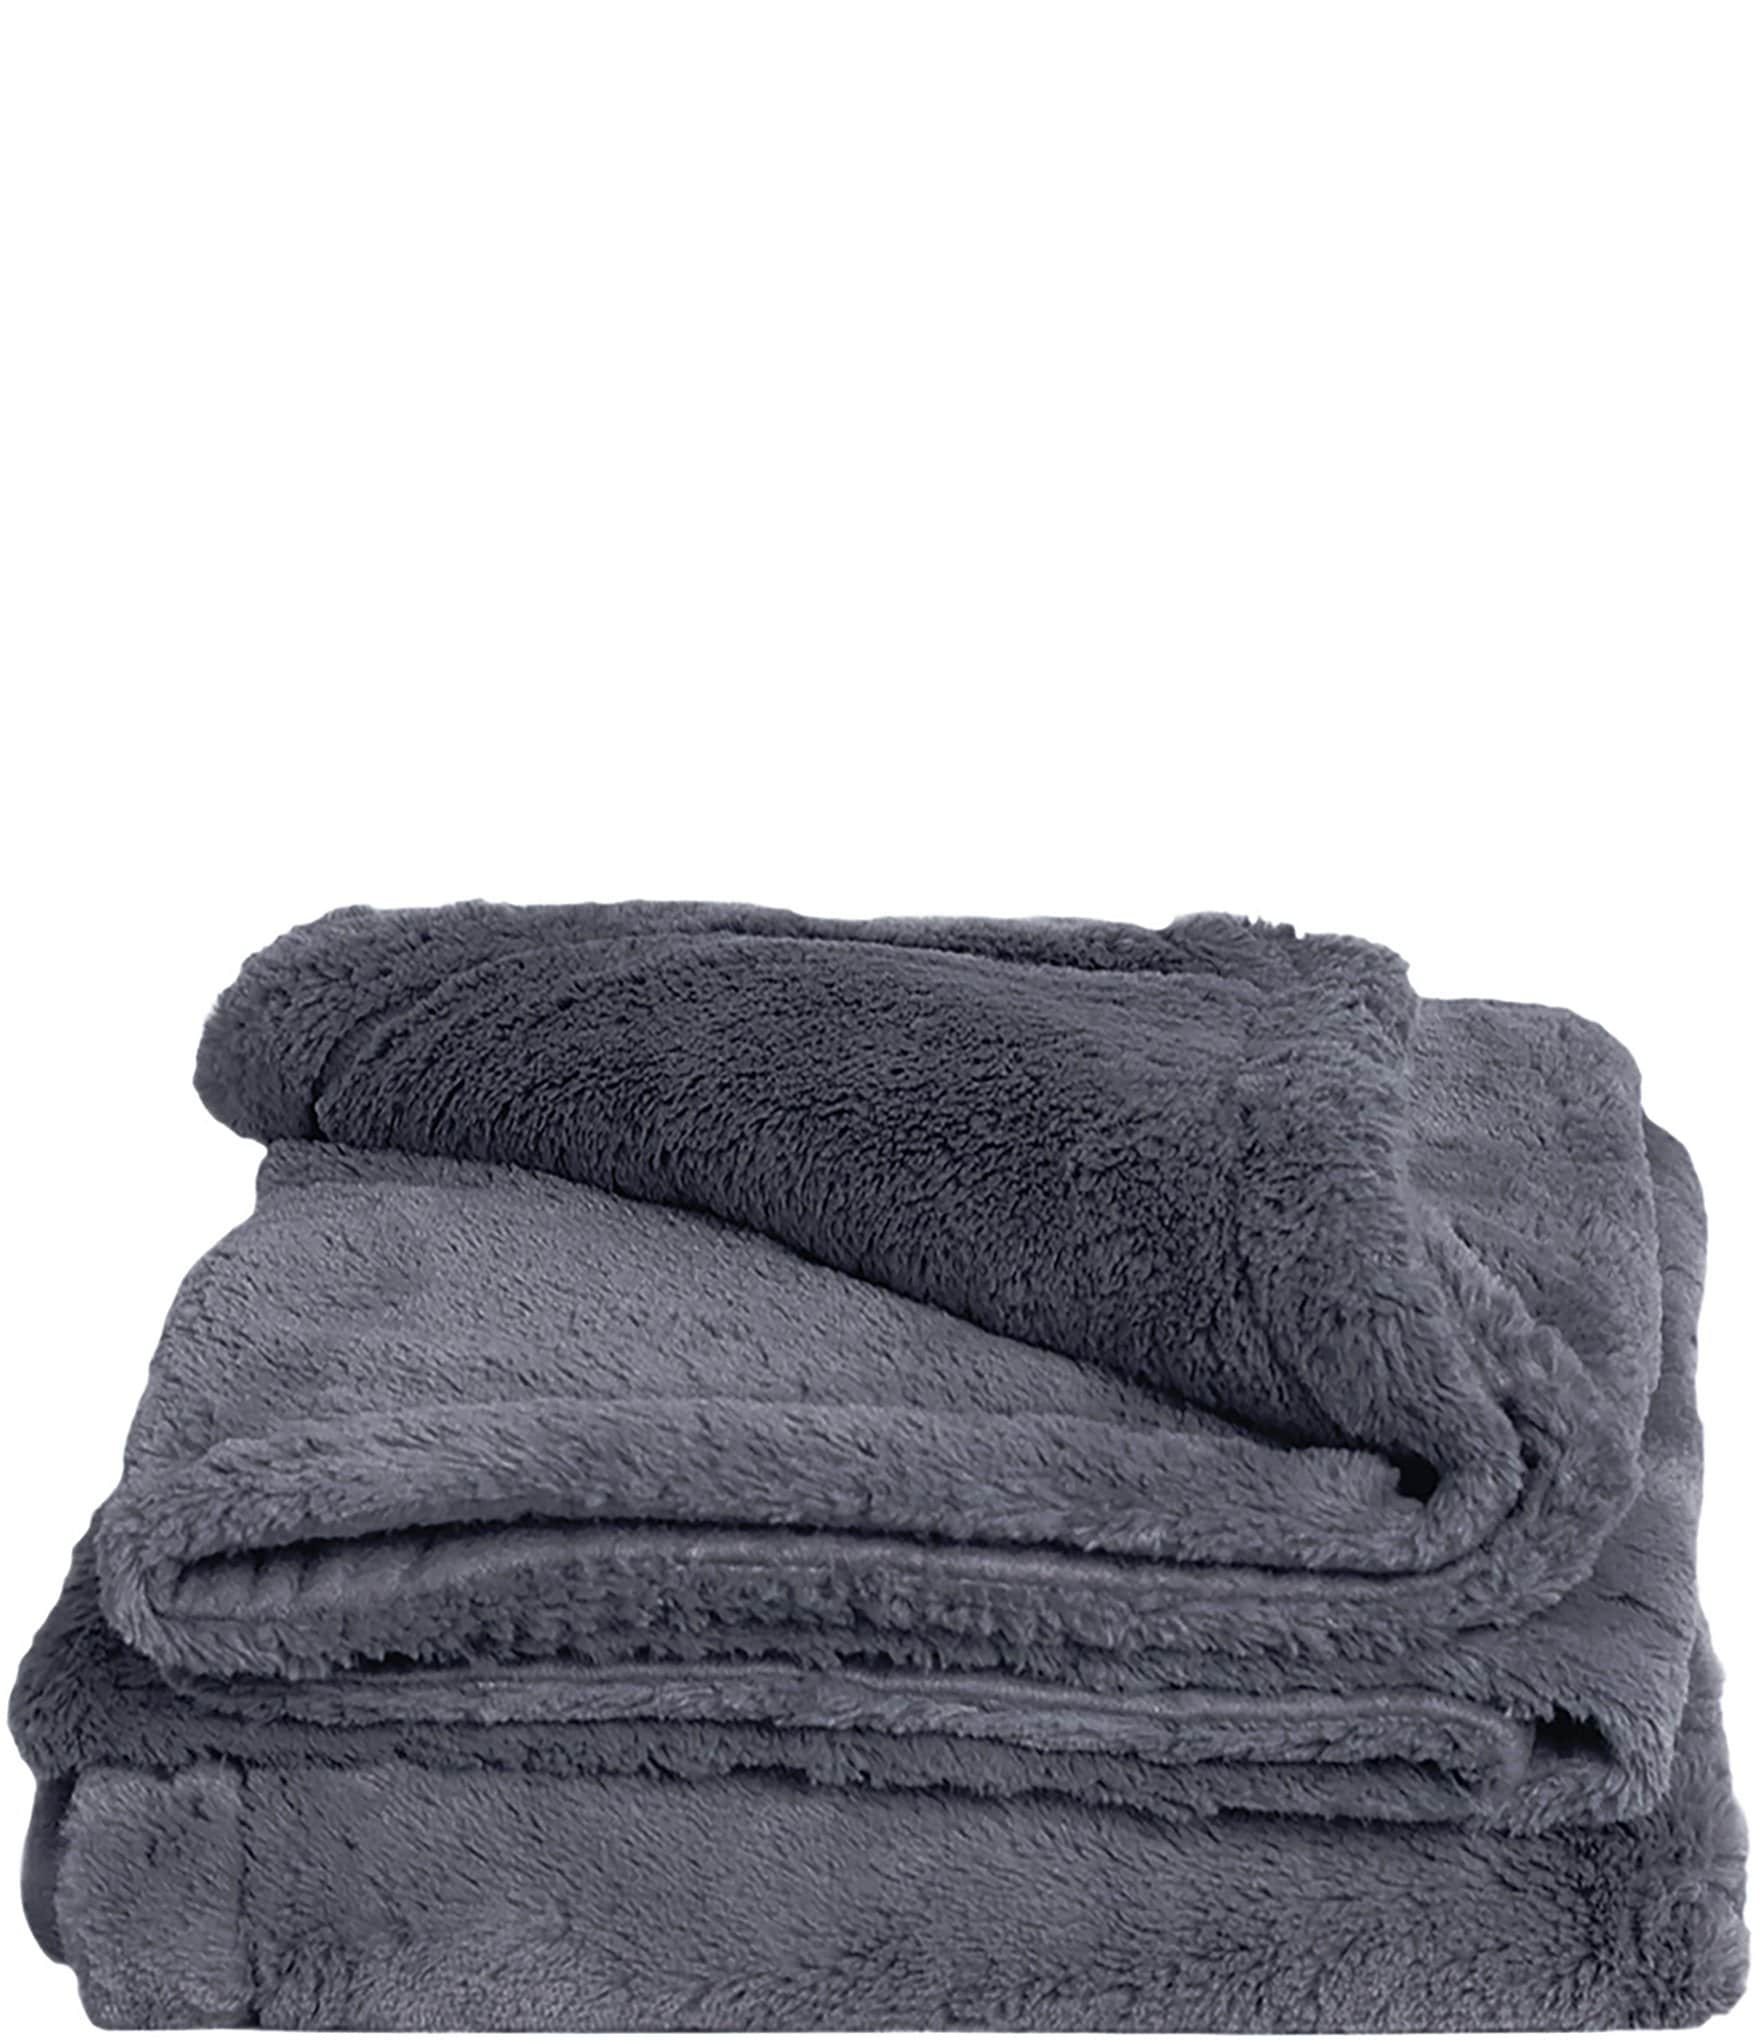 Ultra Soft Plush Bamboo Crazy Soft Bamboo Throw Blanket by Cariloha